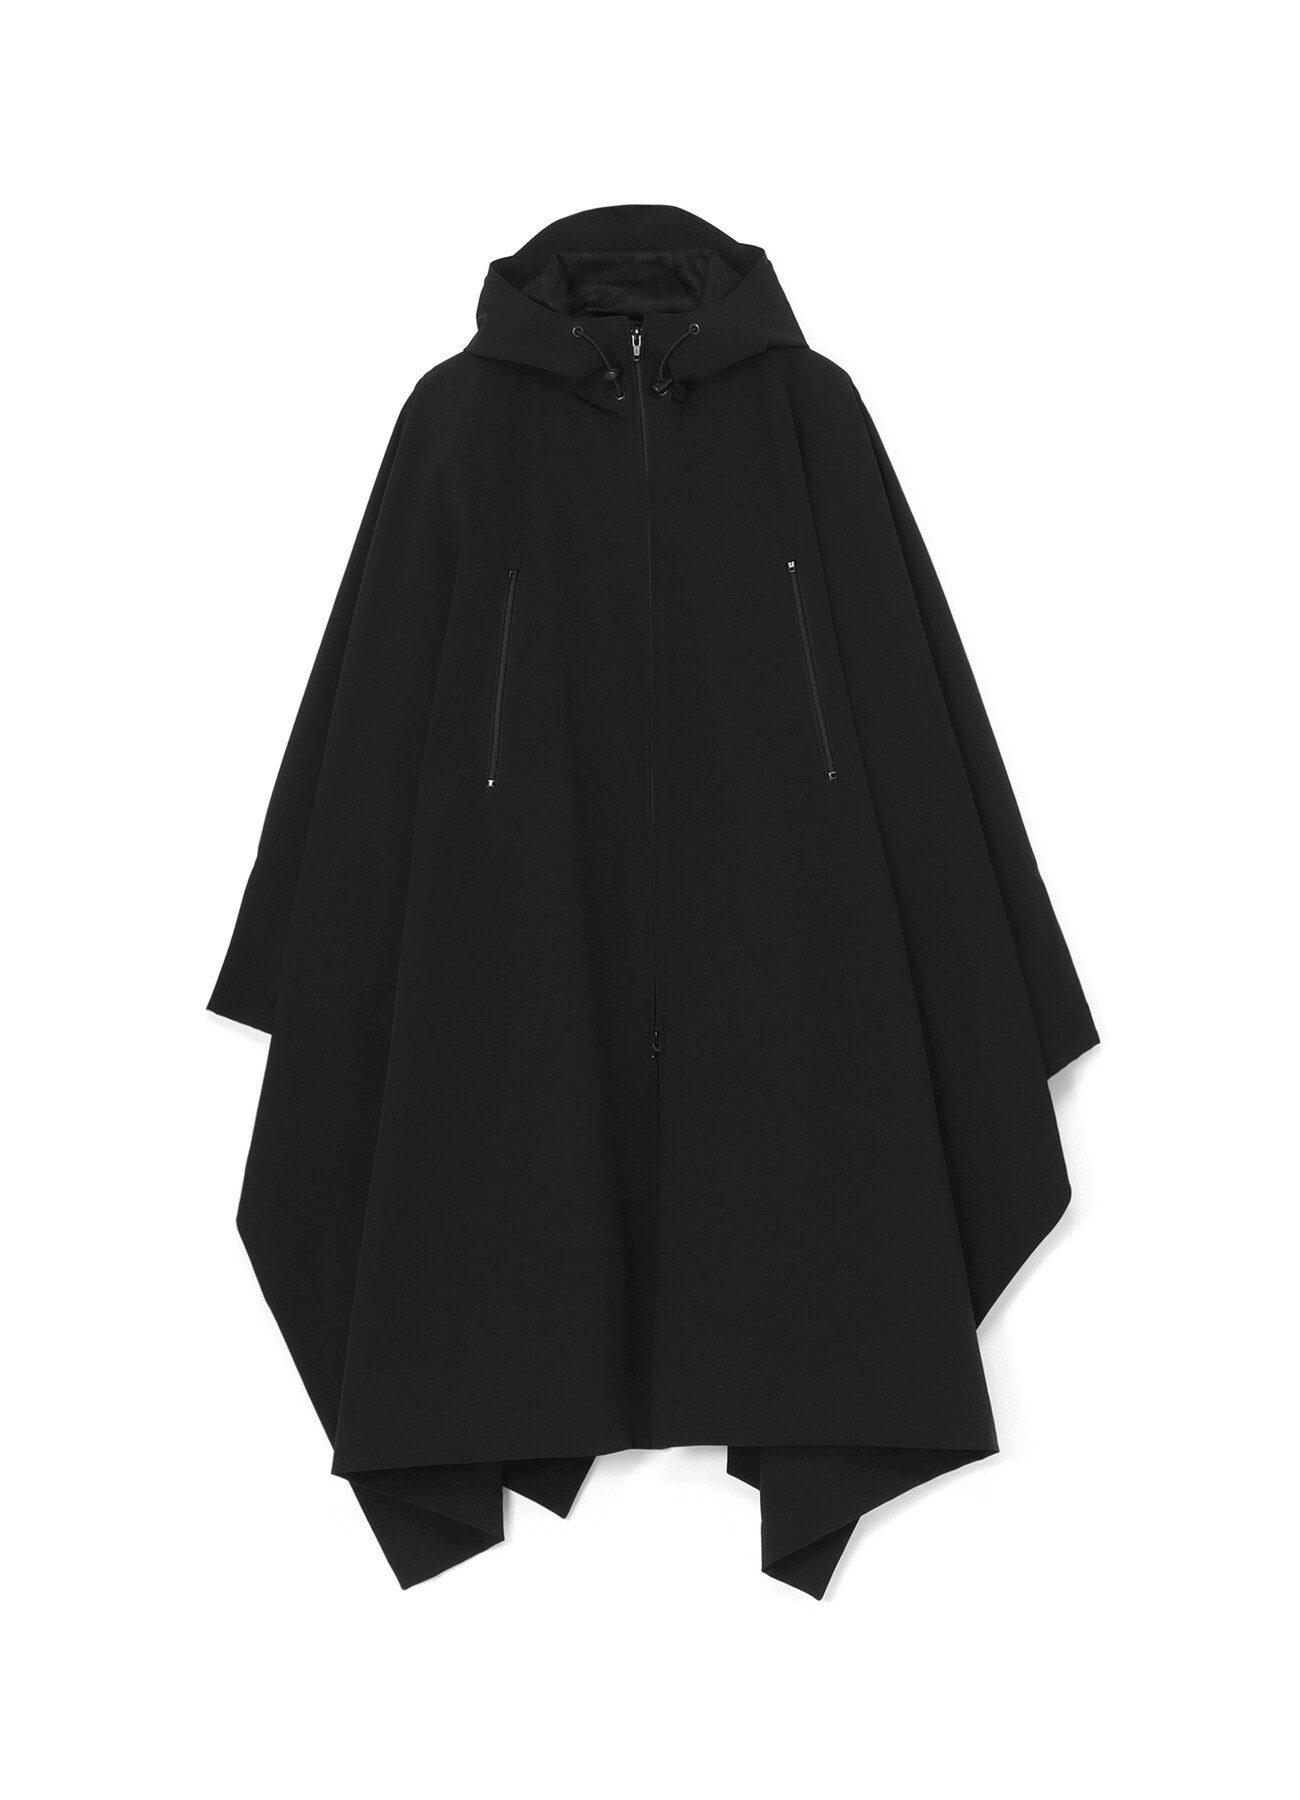 WATER REPELLENT POLYESTER STRETCH DOUBLE LAYERED COAT